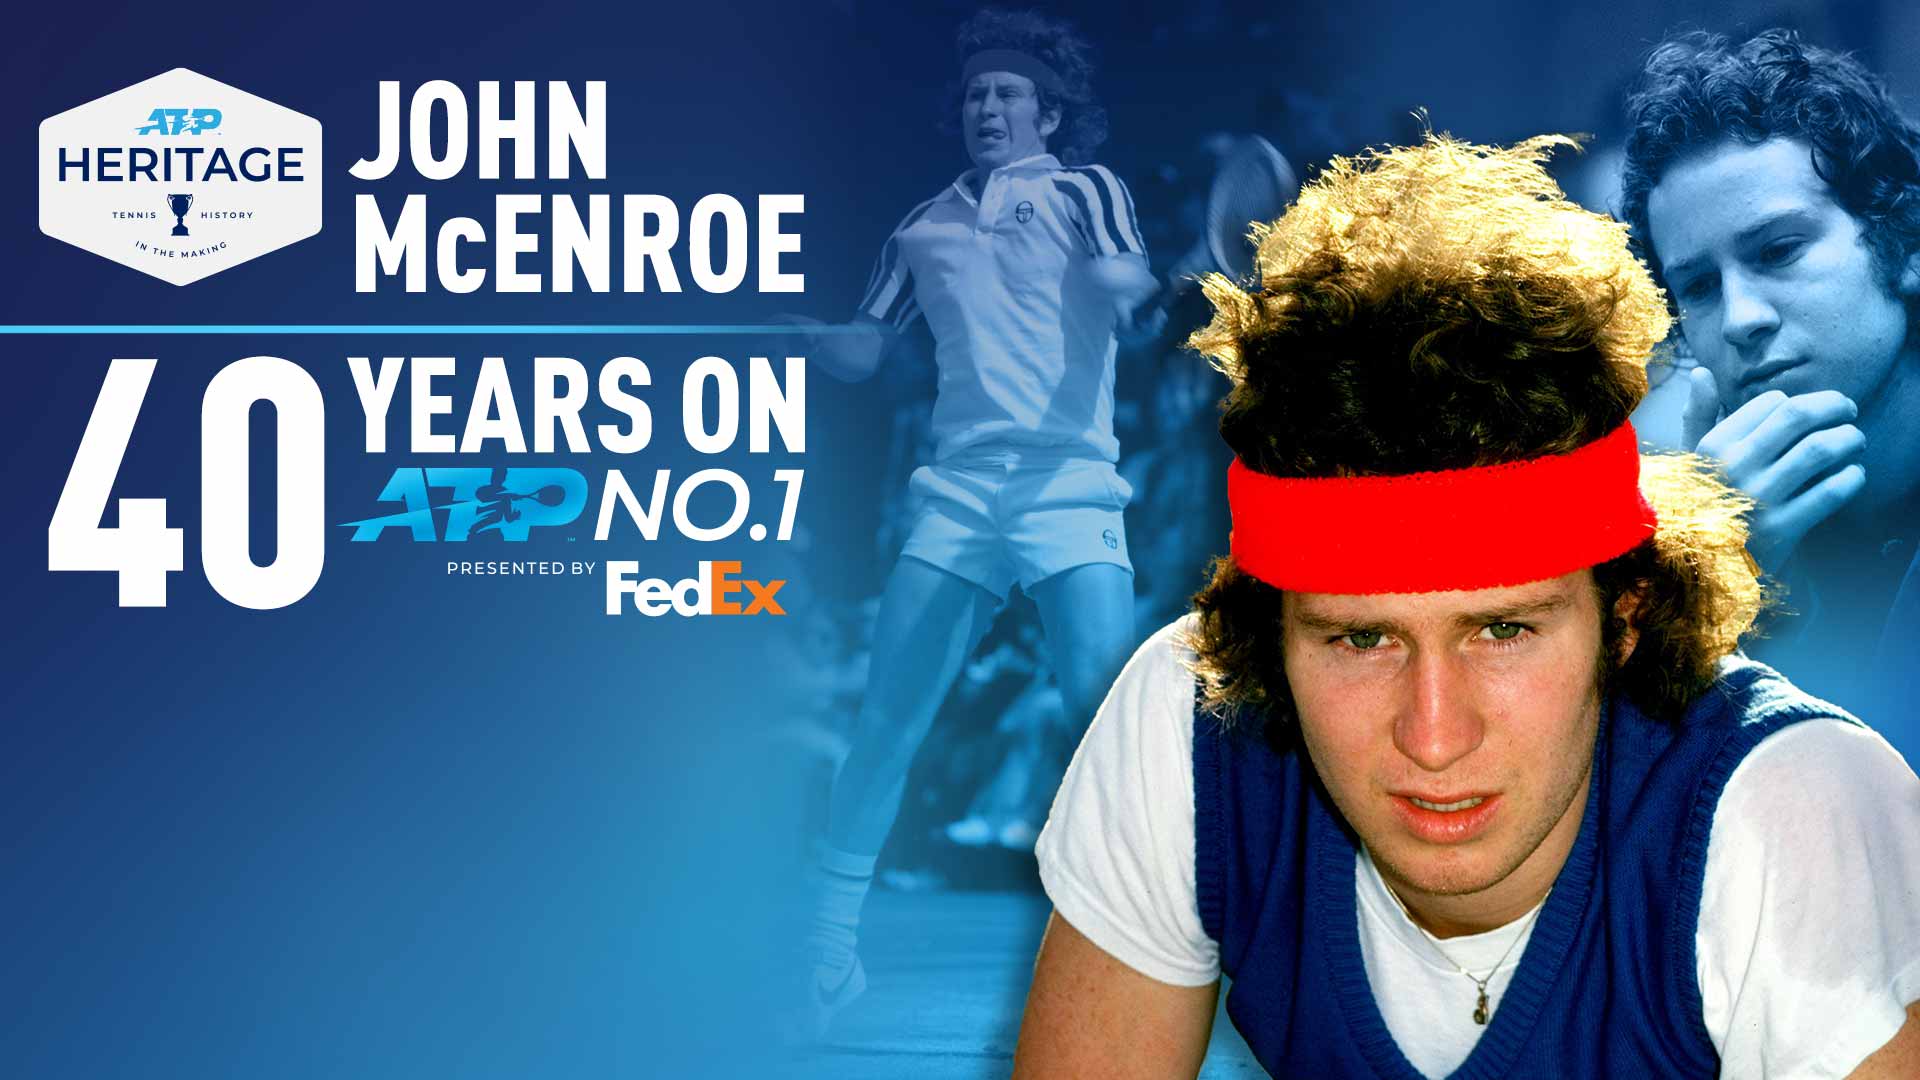 Forty years ago, on 3 March 1980, John McEnroe first rose to No. 1 in the FedEx ATP Rankings.